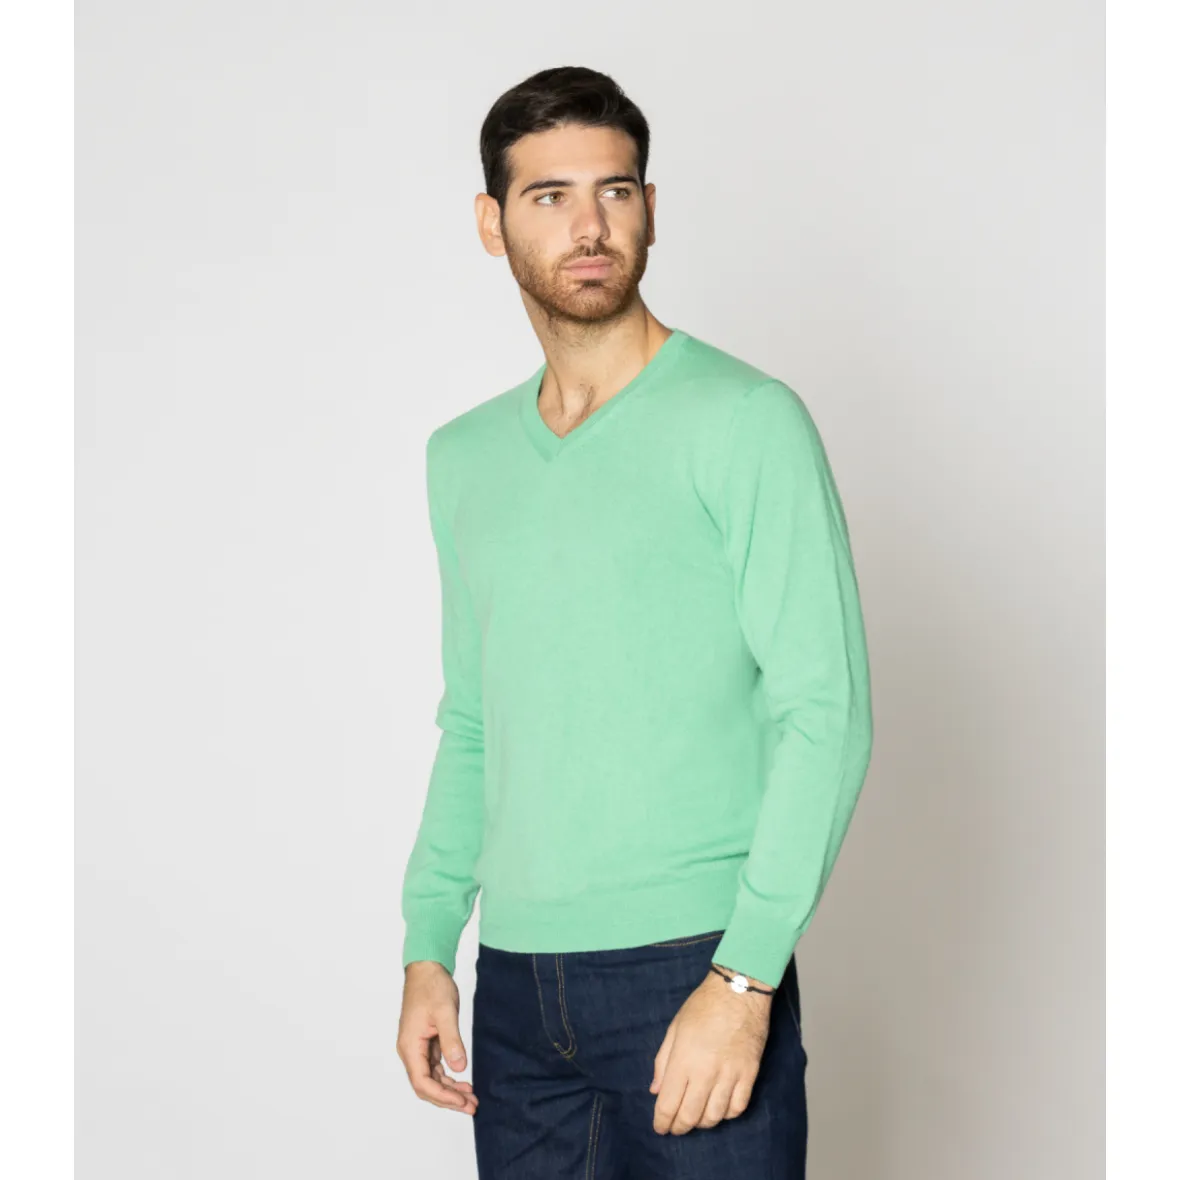 Top quality ECO knitwear 100% cashmere long sleeves V neck men's sweaters regular green